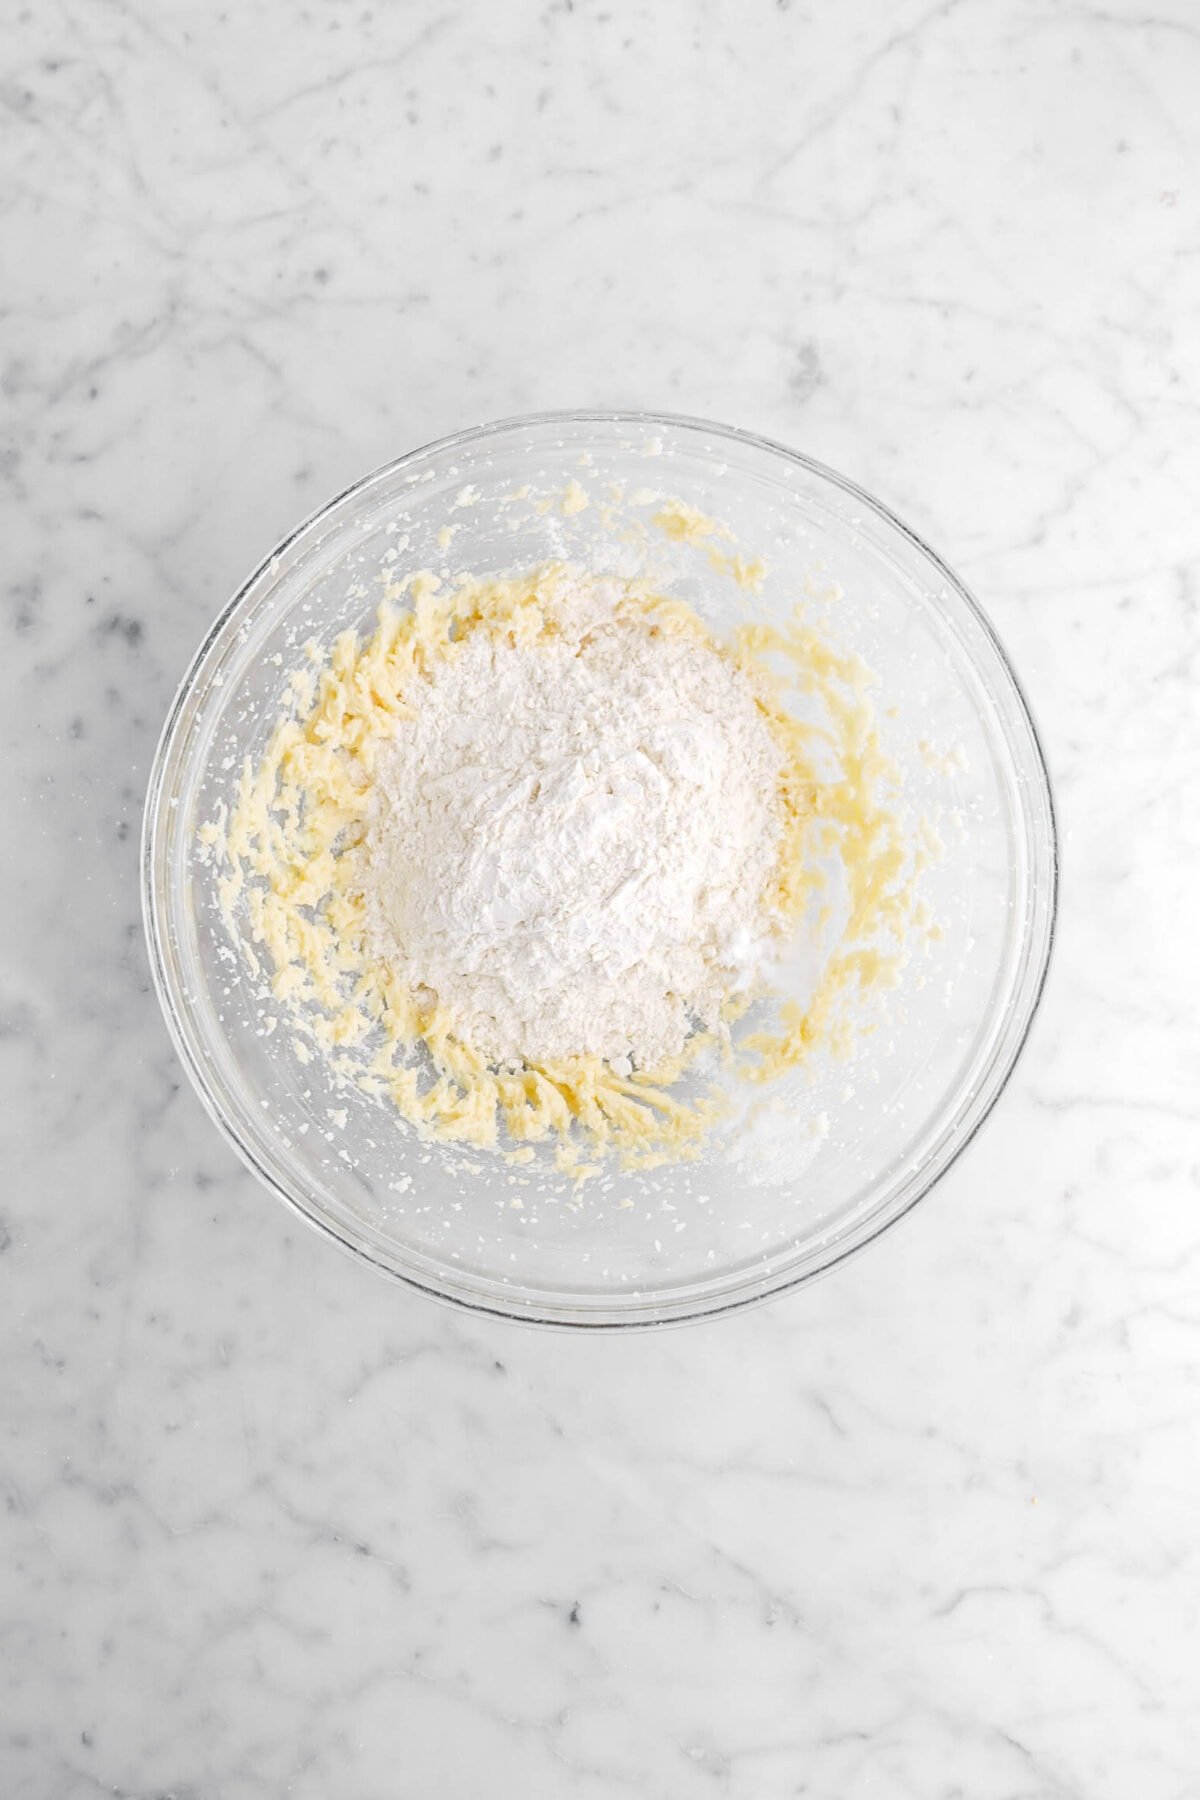 dry ingredients added to butter mixture.